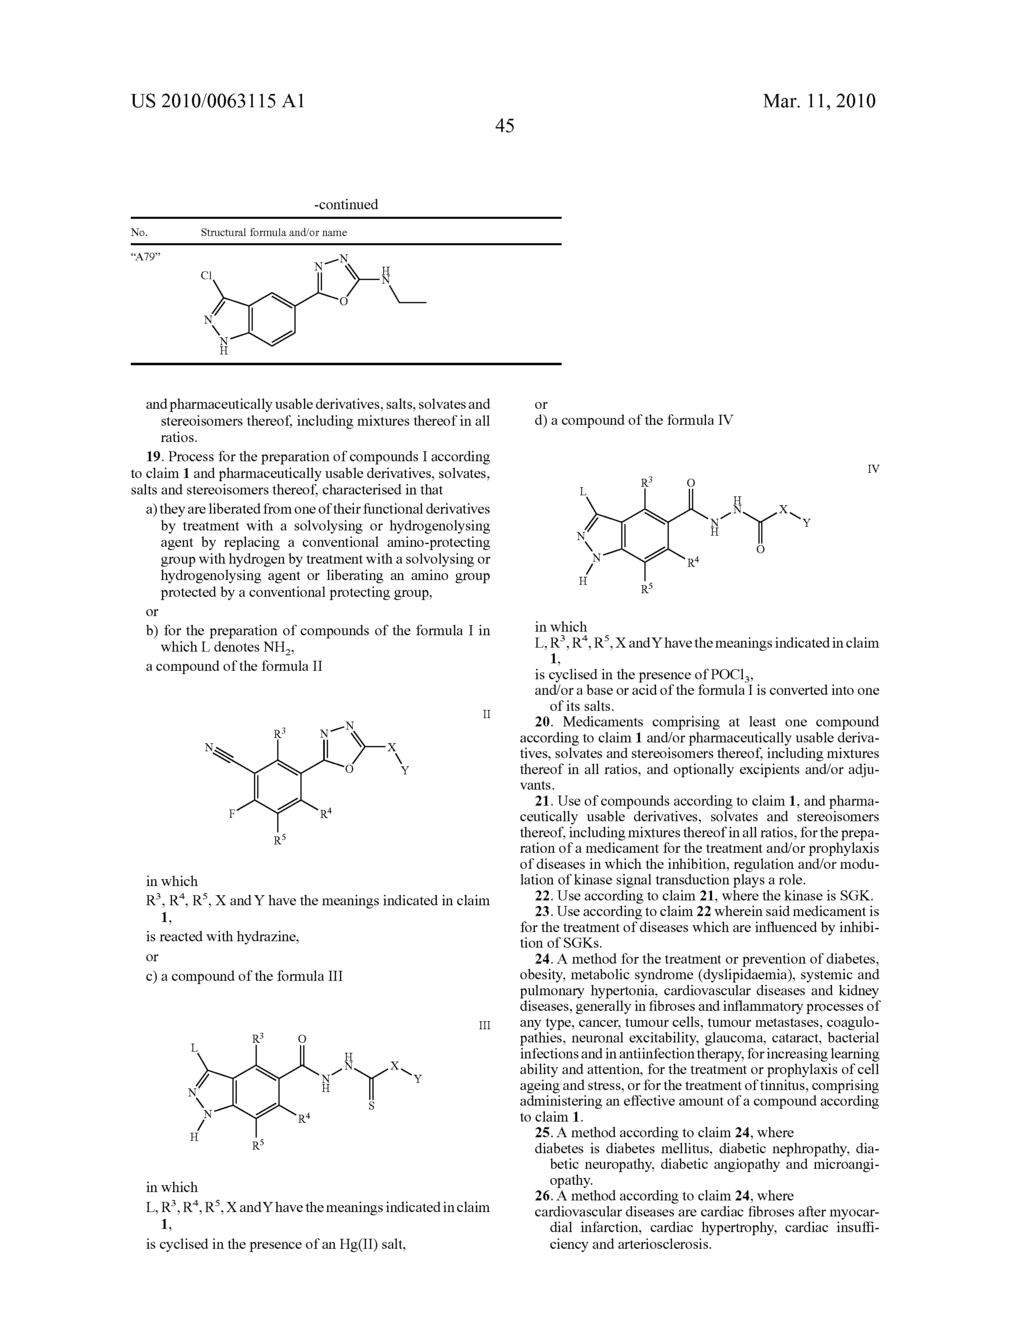 5-(1,3,4-OXADIAZOL-2-YL)-1H-INDAZOLE AND 5-(1,3,4-THIADIAZOL-2-YL)-1H-INDAZOLE DERIVATIVES AS SGK INHIBITORS FOR THE TREATMENT OF DIABETES - diagram, schematic, and image 46